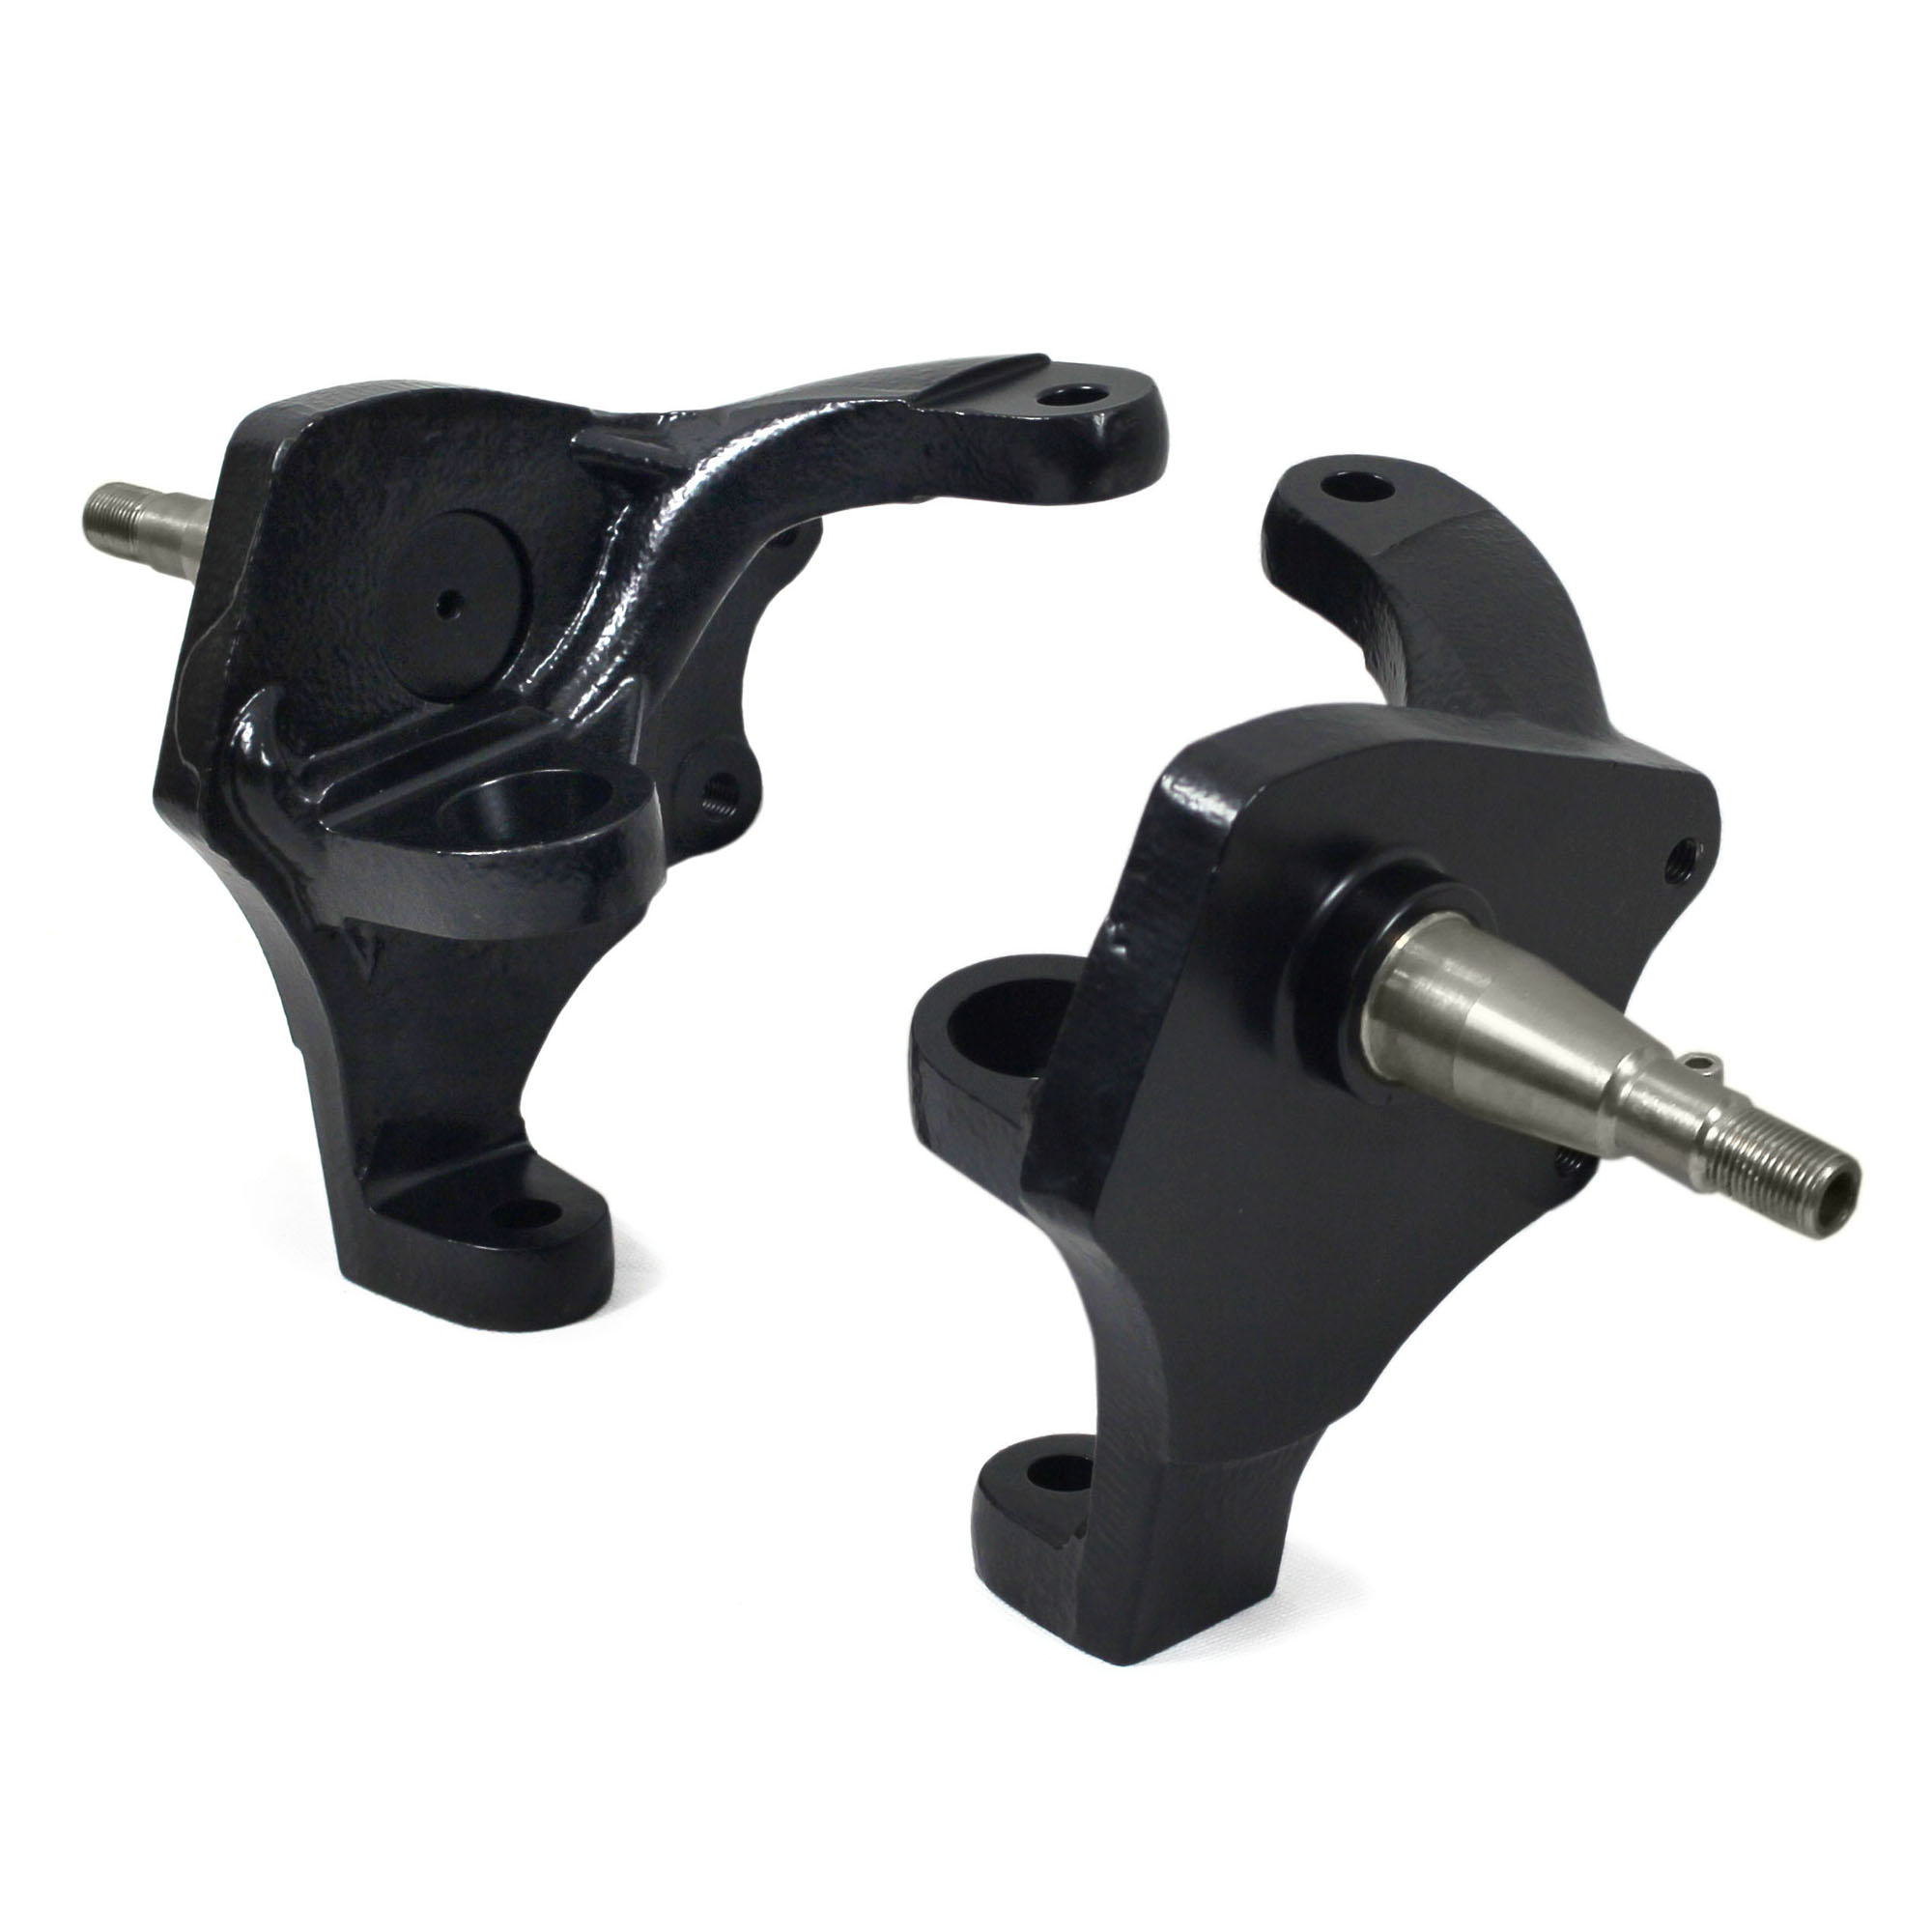 T1 1966-79 Beetle / Ghia Ball Joint Disk 2.5″ Dropped Spindles, Powder Coated Satin Black